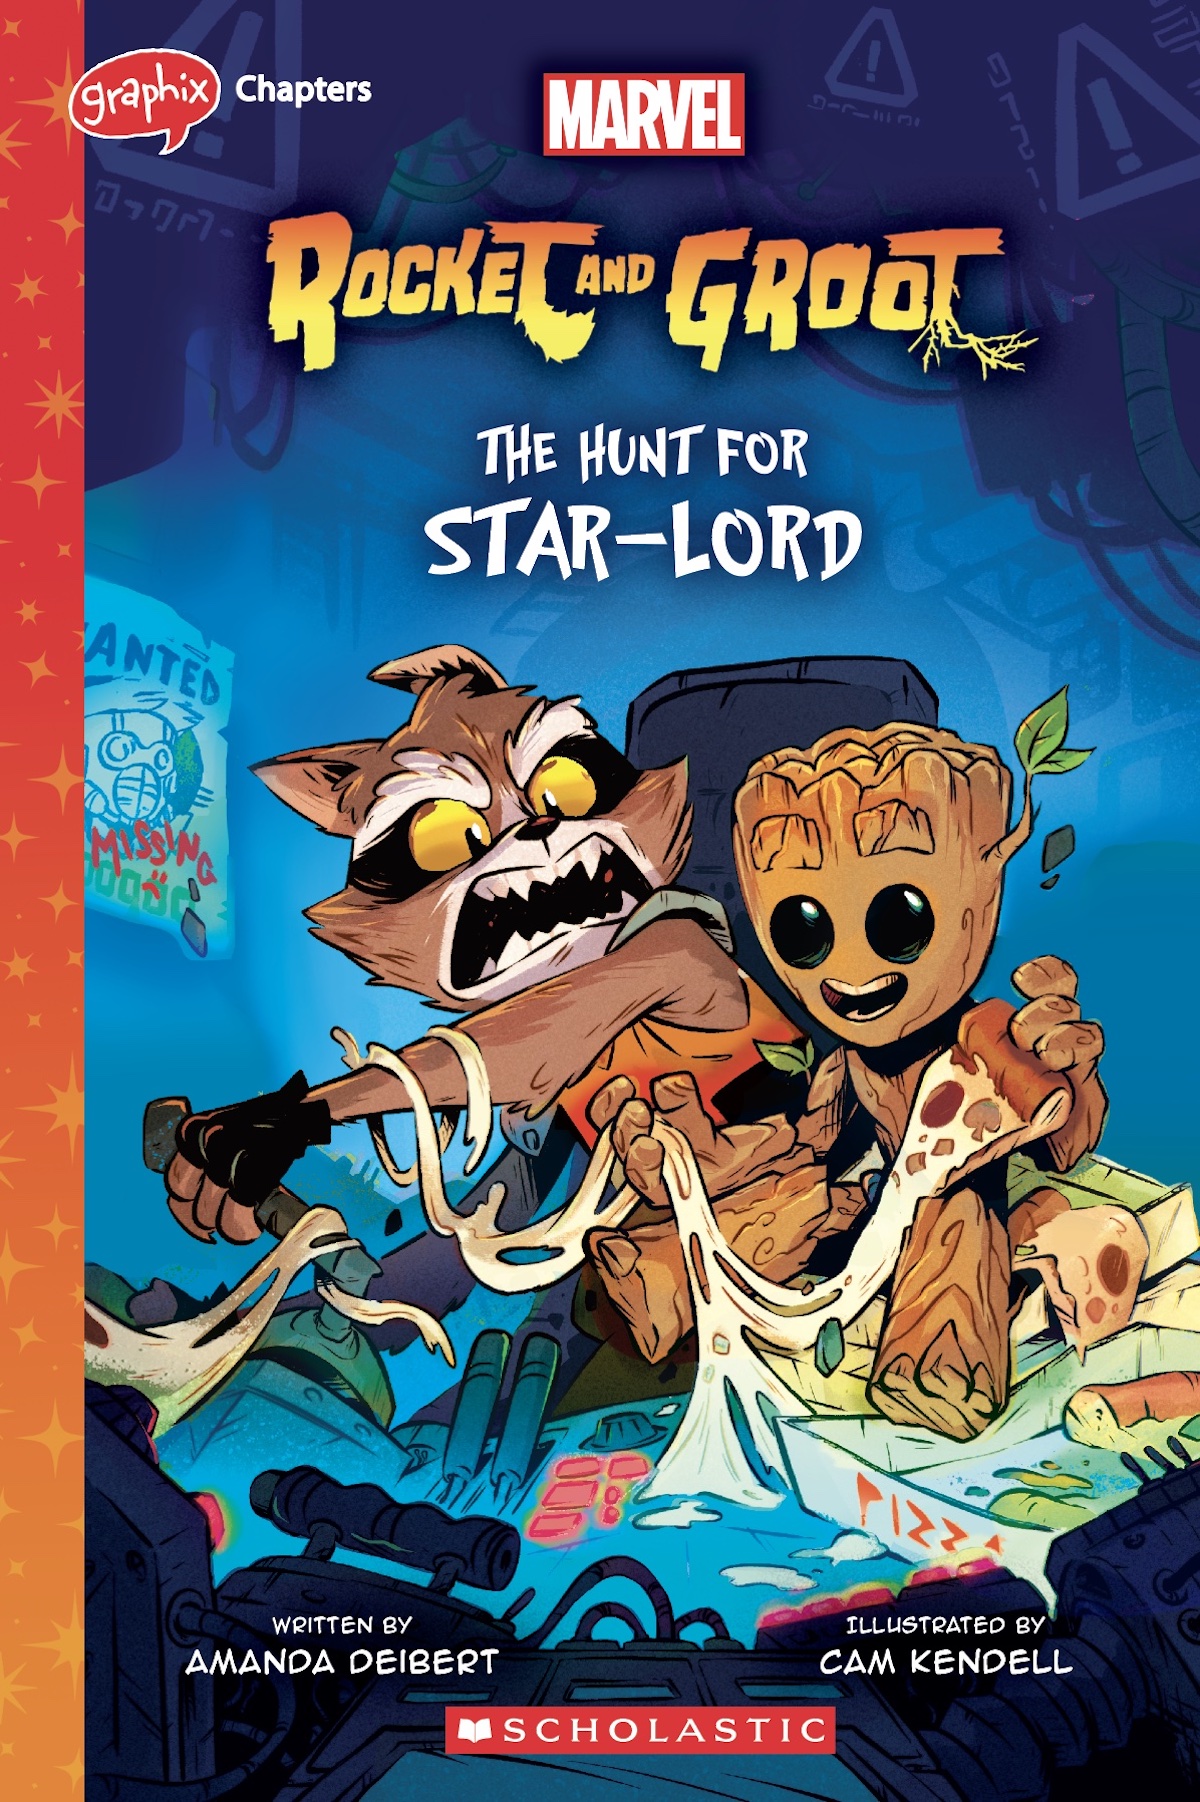 Rocket and Groot: The Hunt for Star-Lord from Marvel and Graphix Chapters, written by Amanda Deibert and illustrated by Cam Kendell.